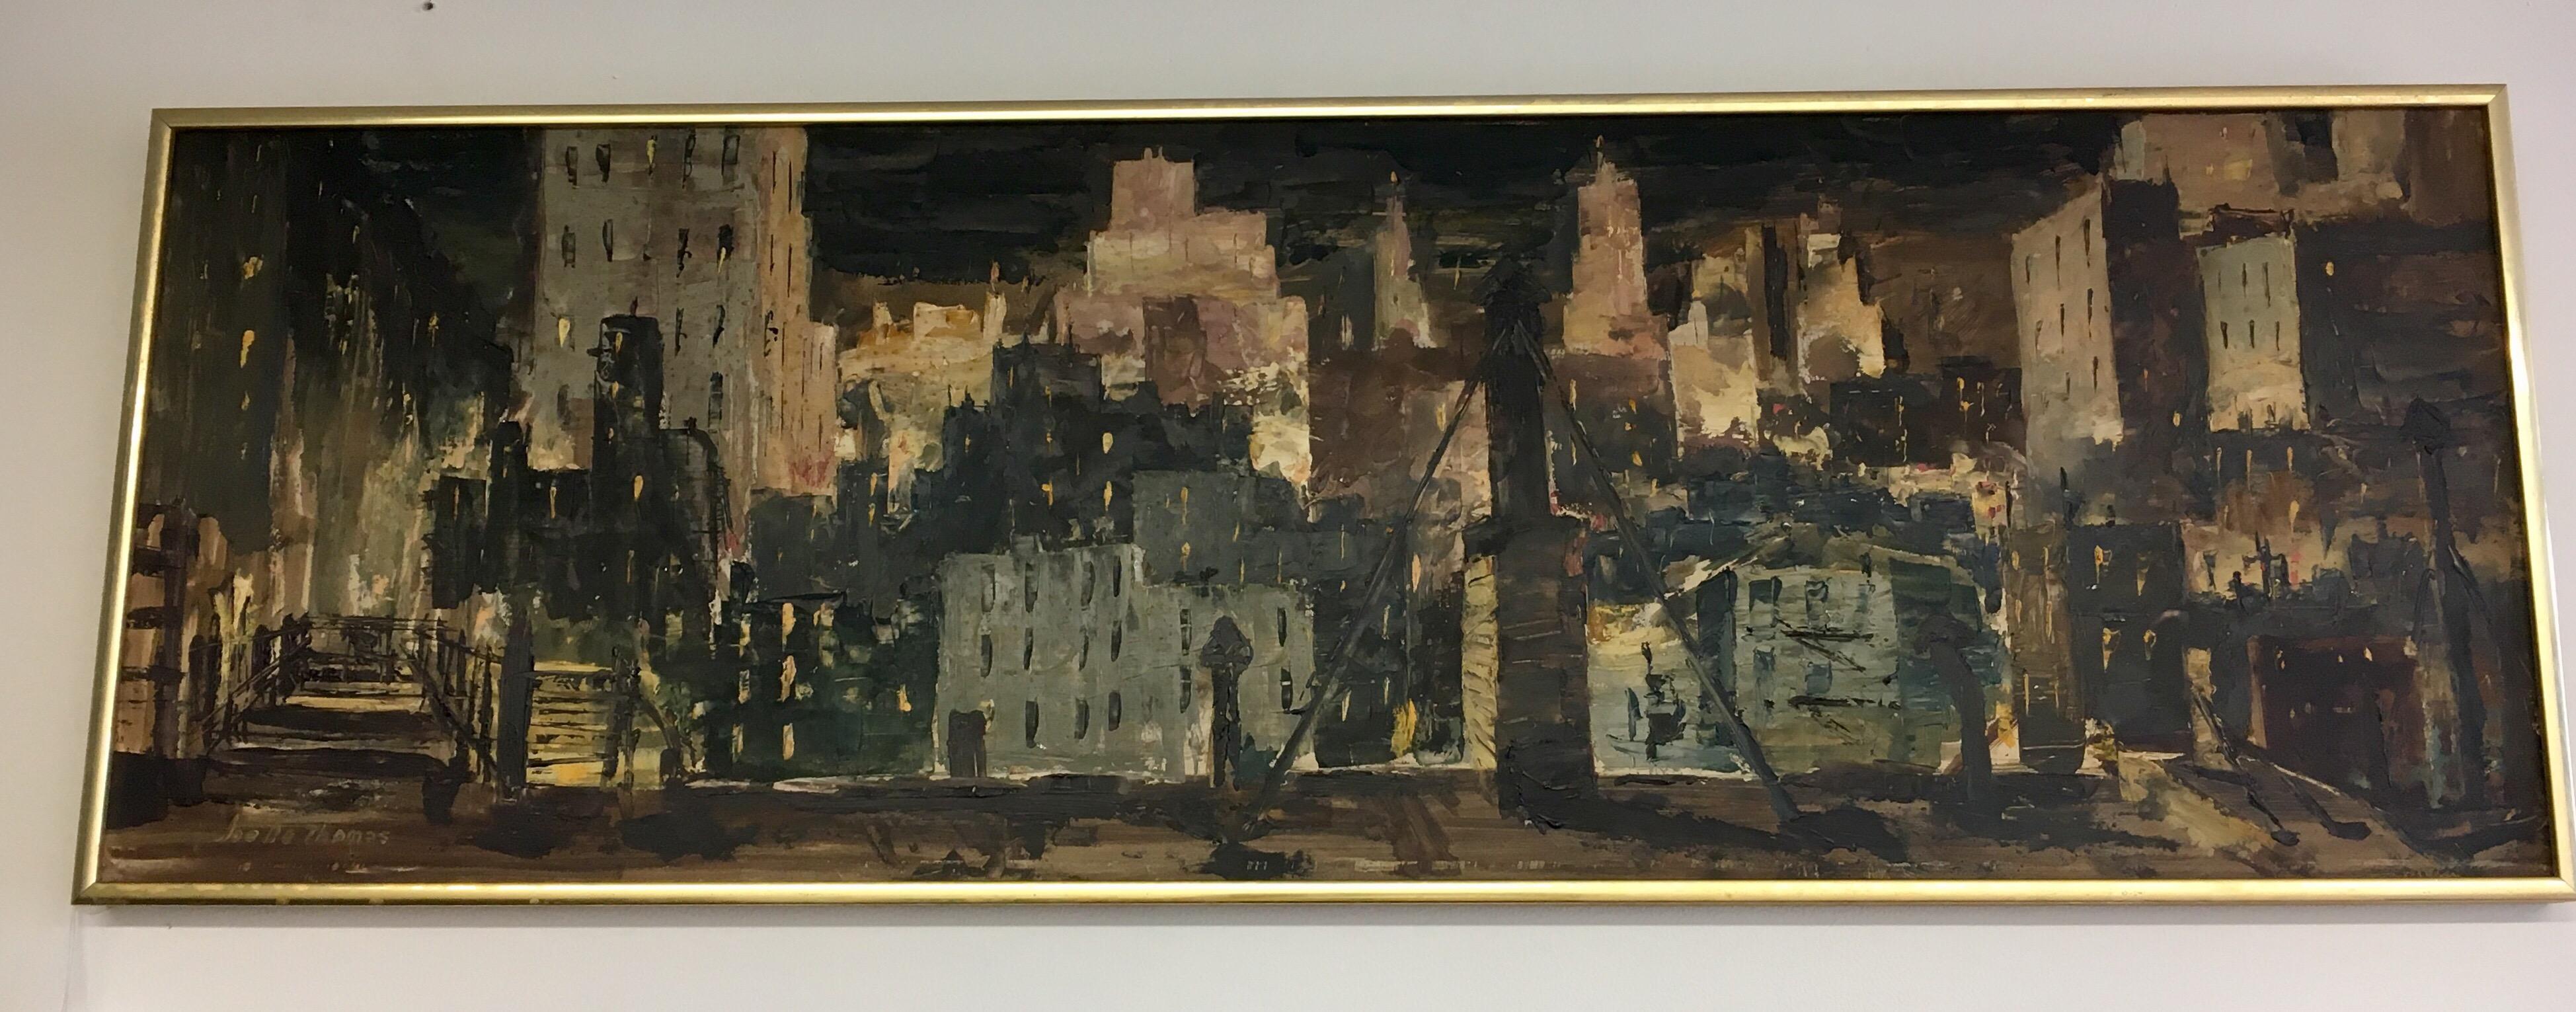 Oil on board original 1960s abstract cityscape by Joe B. Thomas. Artist signature on lower left.